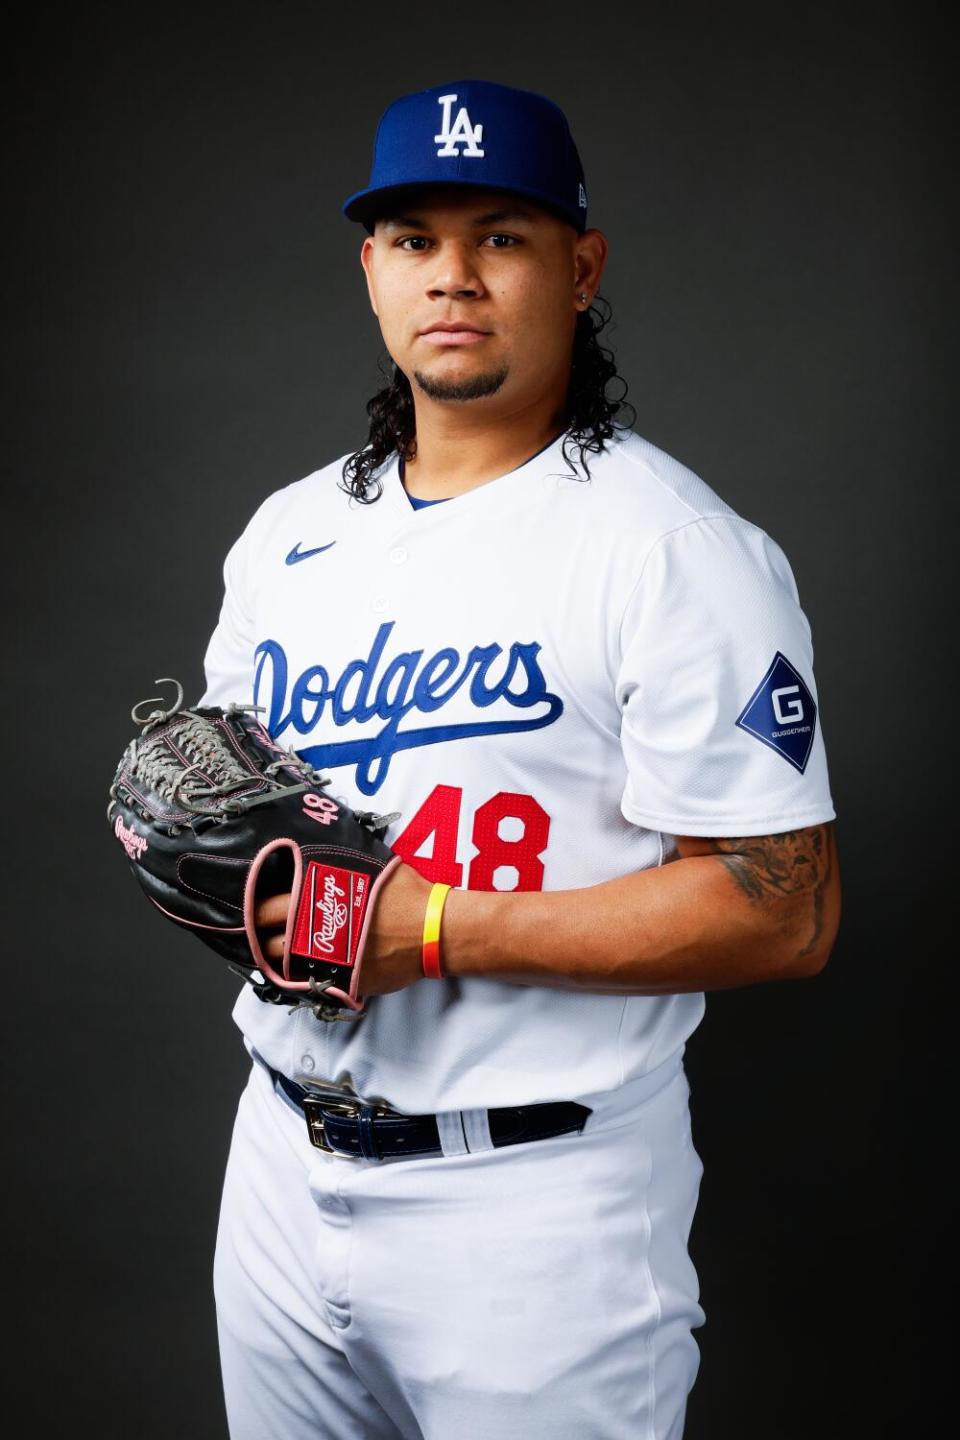 Dodgers relief pitcher Brusdar Graterol poses for a photo at spring training.